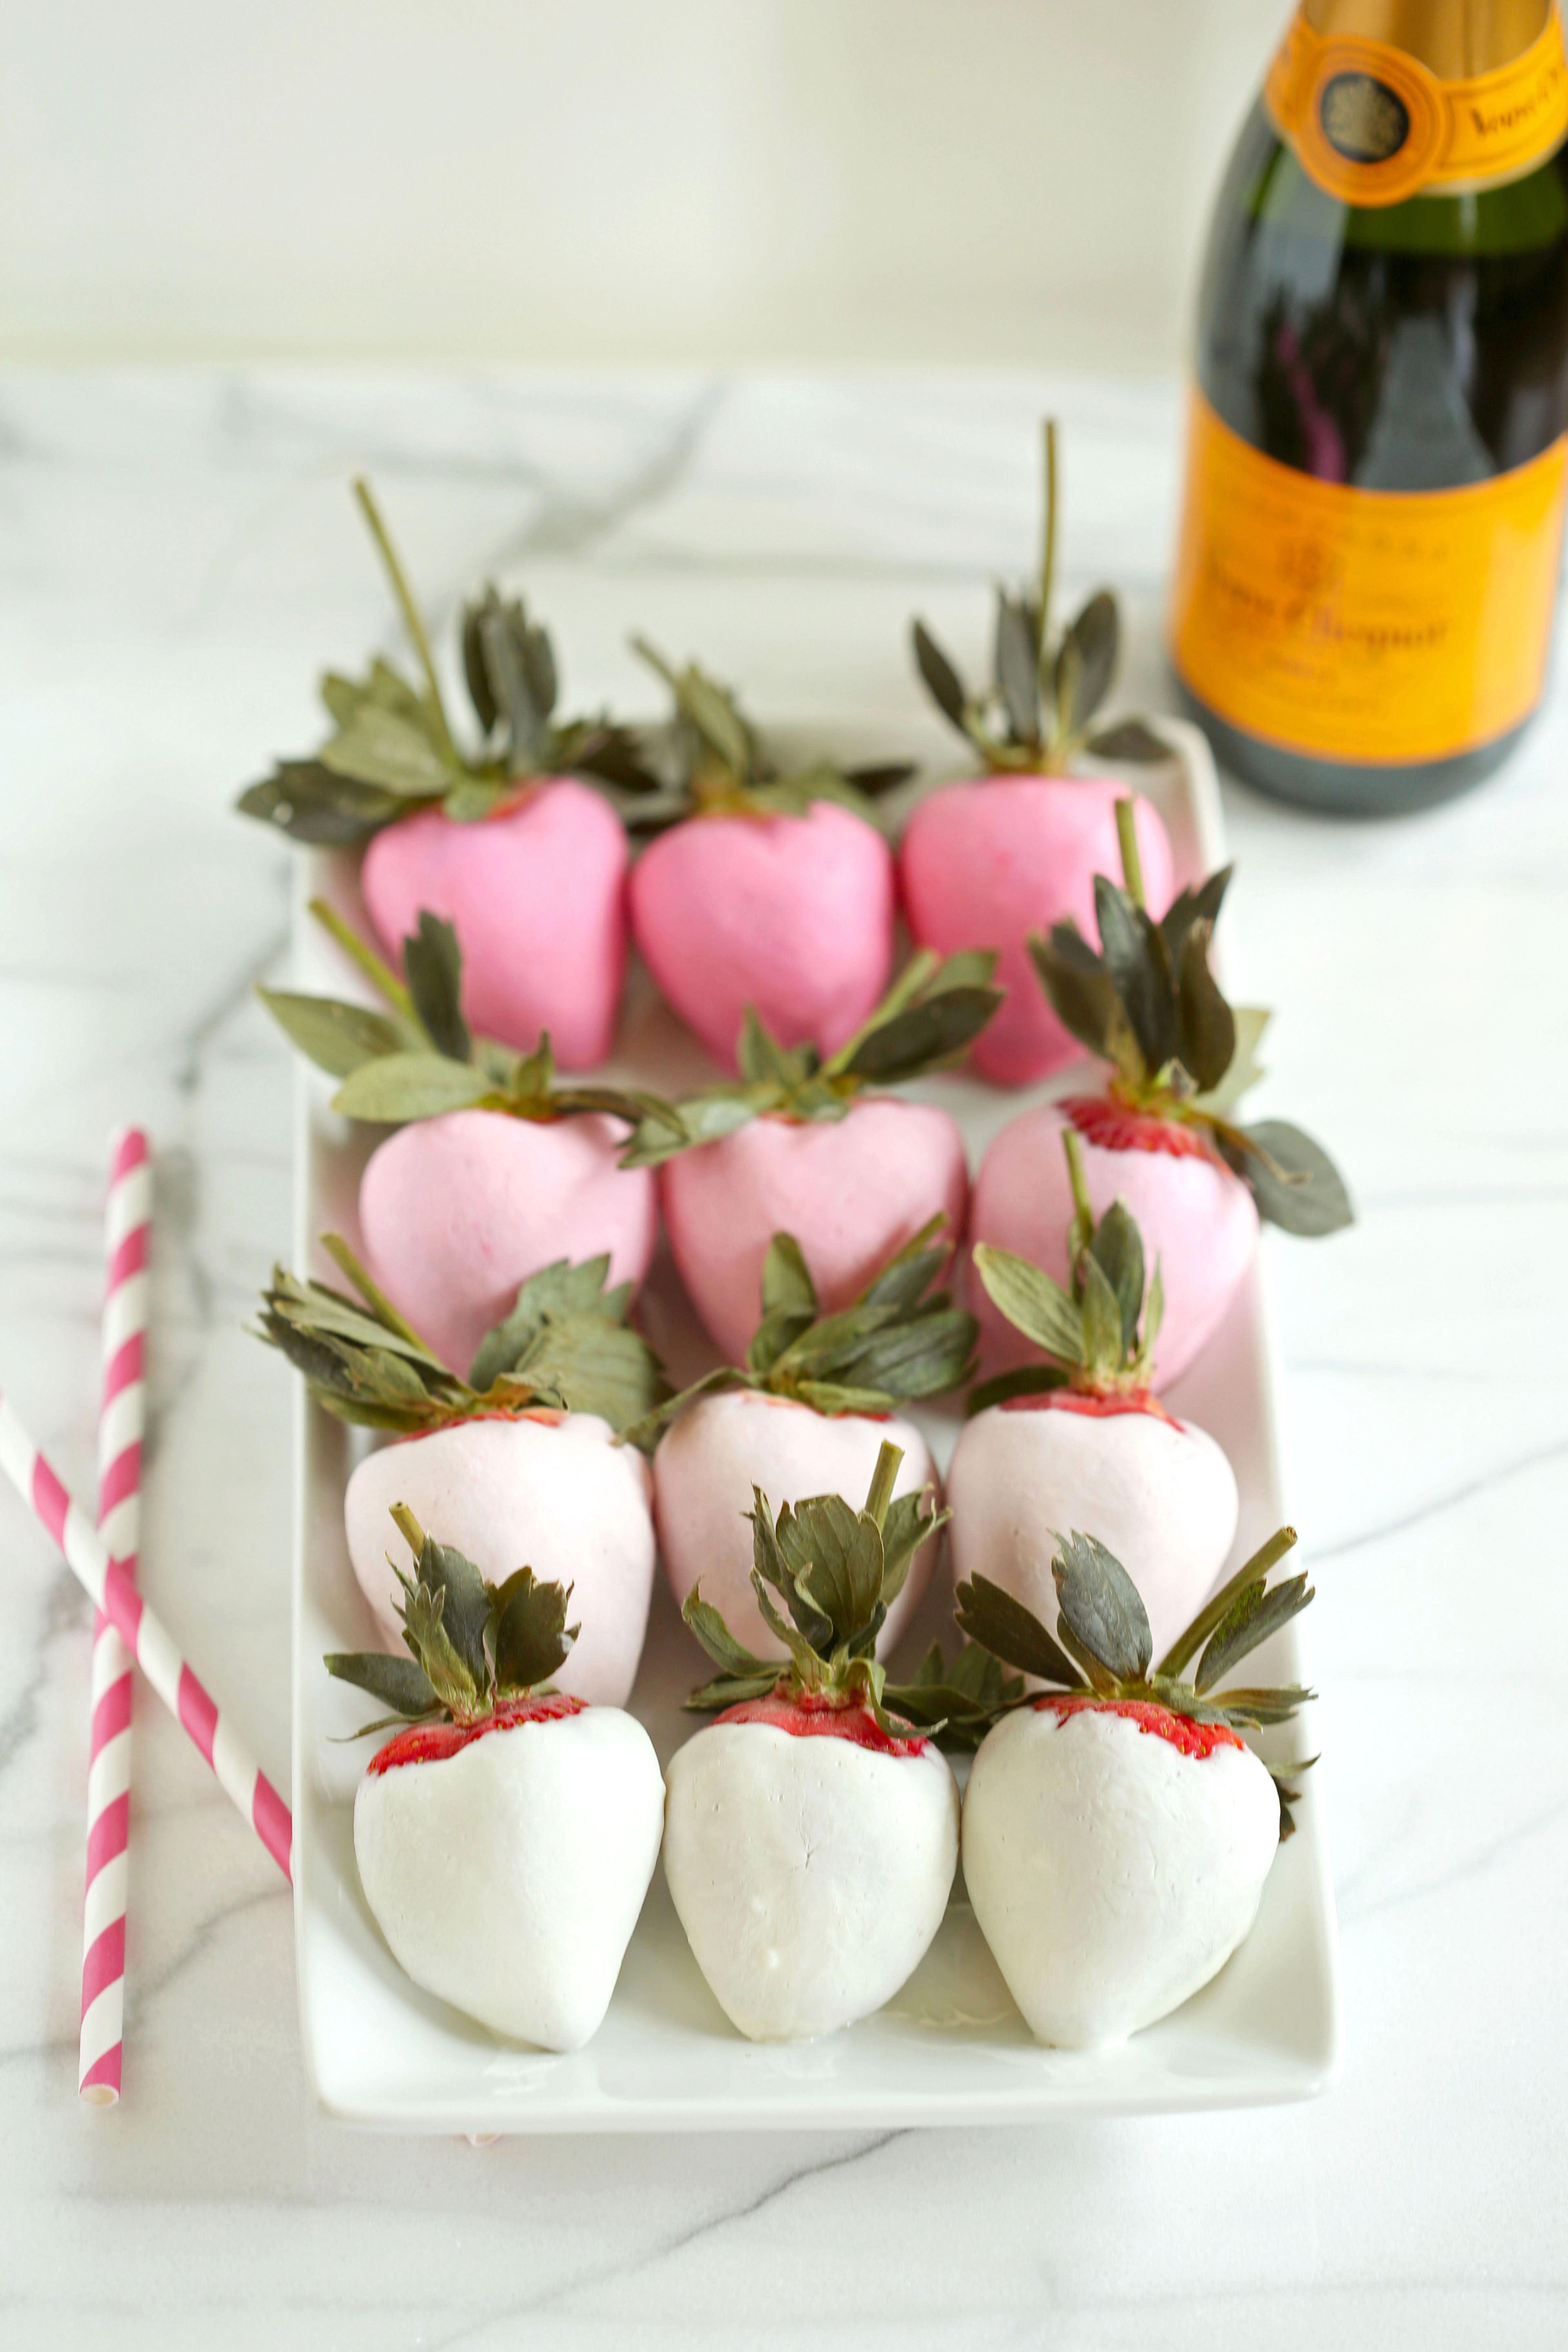 Yogurt Dipped Pink Ombre Strawberries for Valentine's Day! | Eat Yourself Skinny